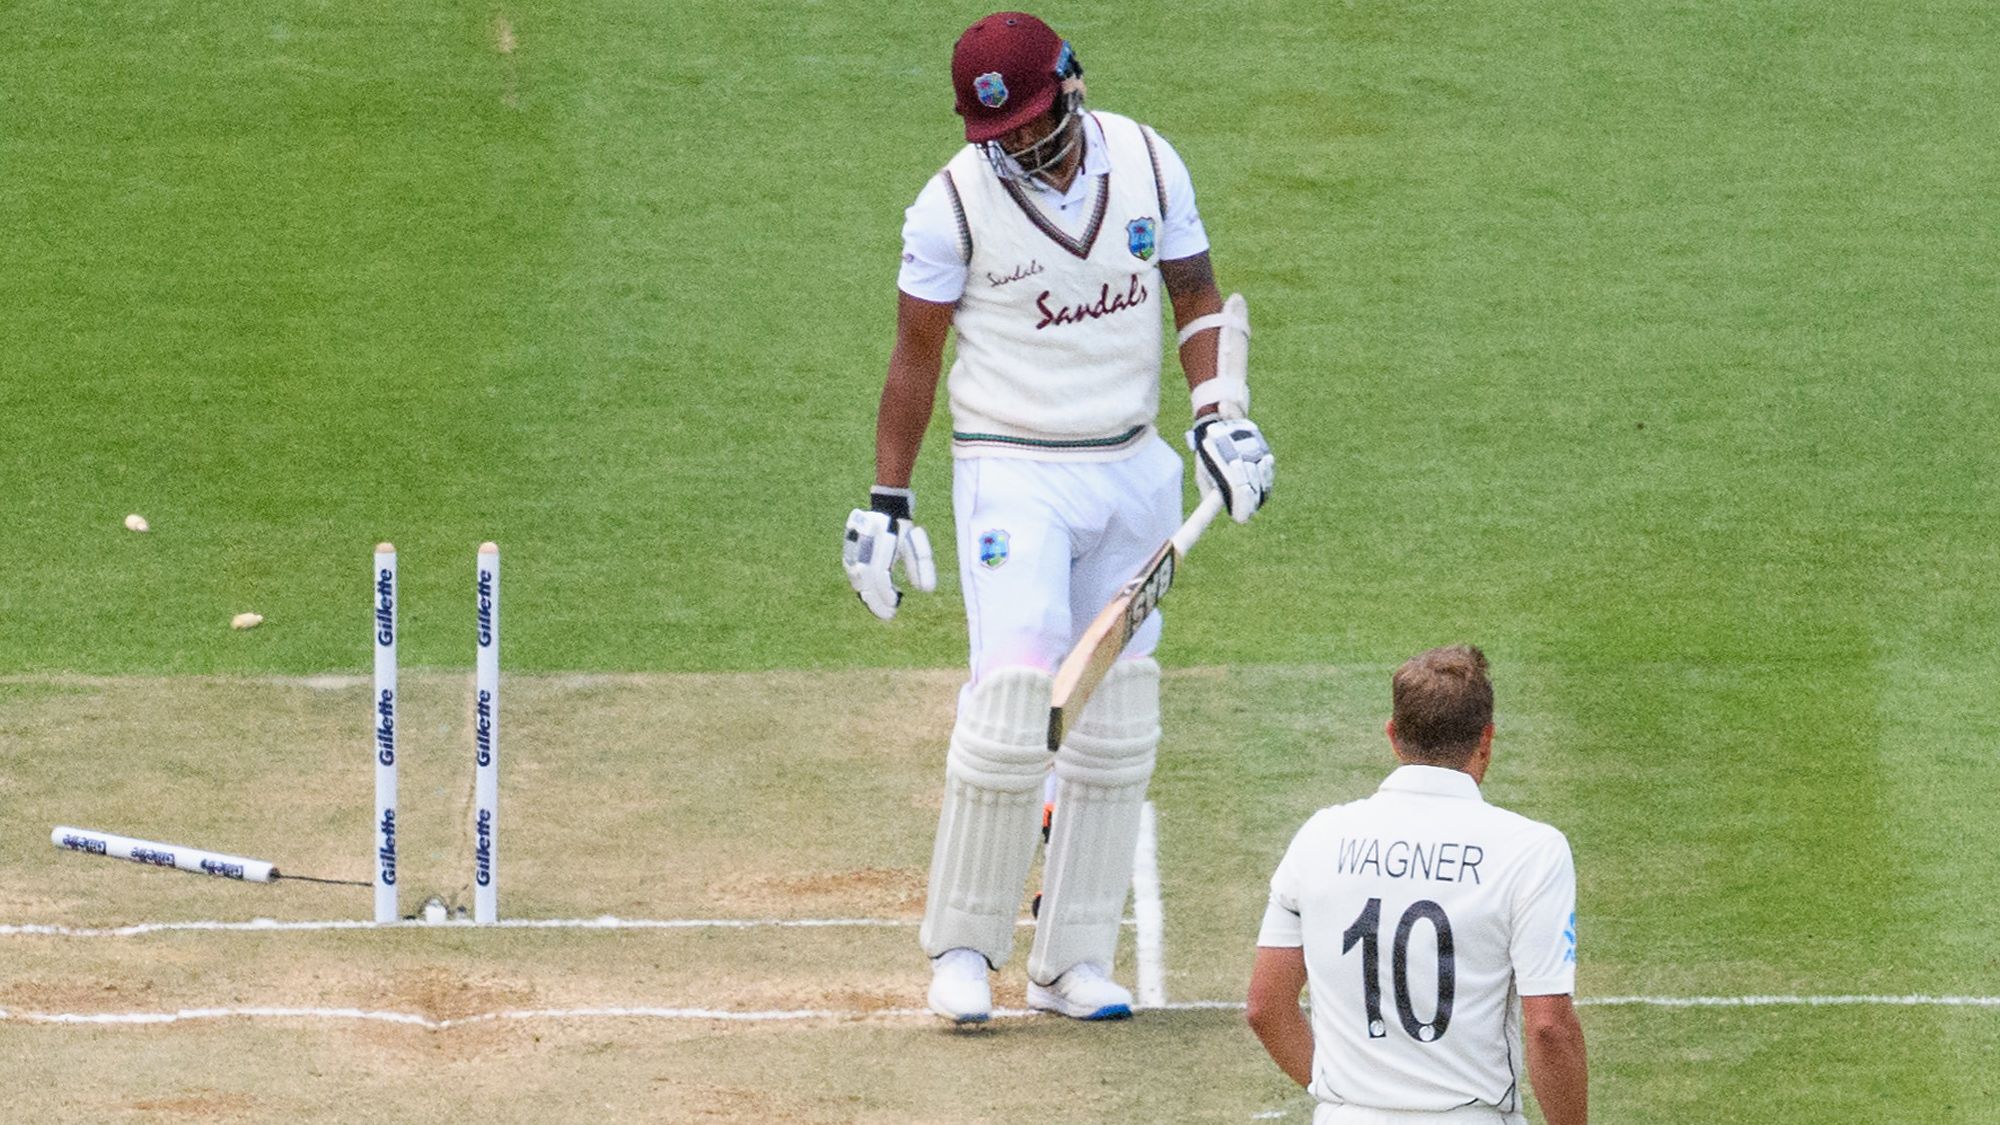 Shannon Gabriel of the West Indies looks dejected after being dismissed by Neil Wagner of New Zealand.